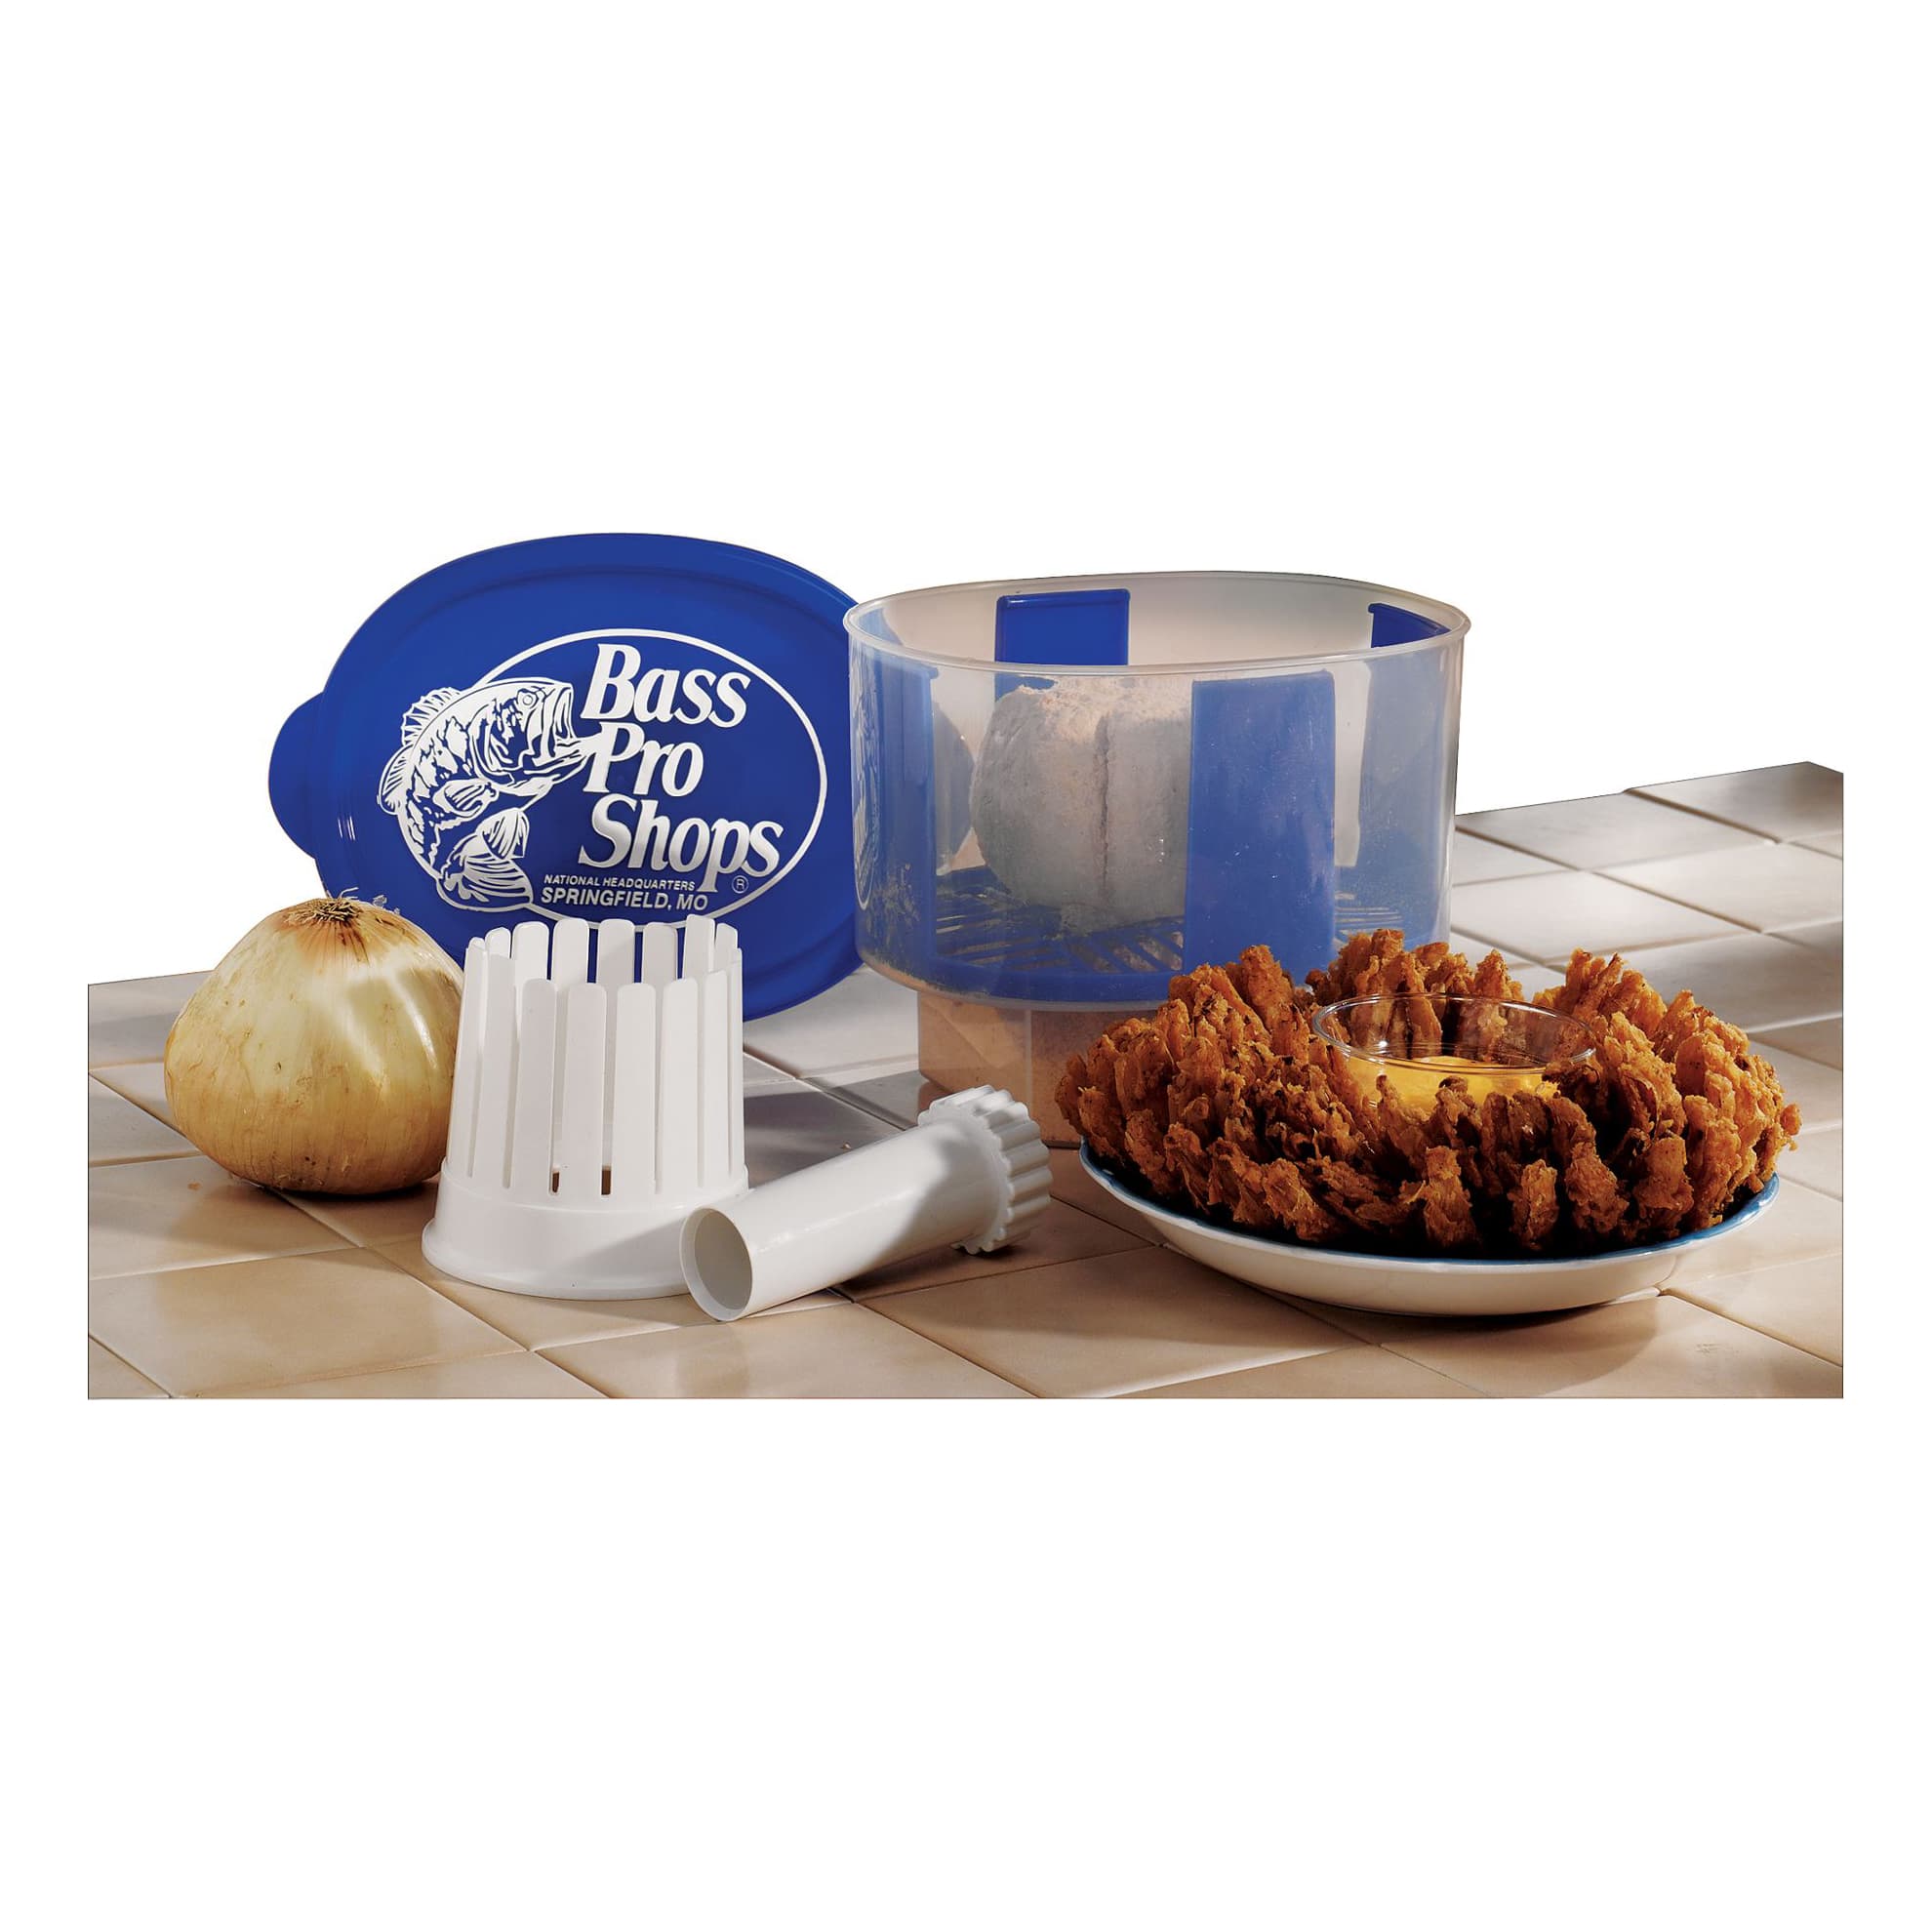 Bass Pro Shops® Breader Bowl and Onion Blossom Maker